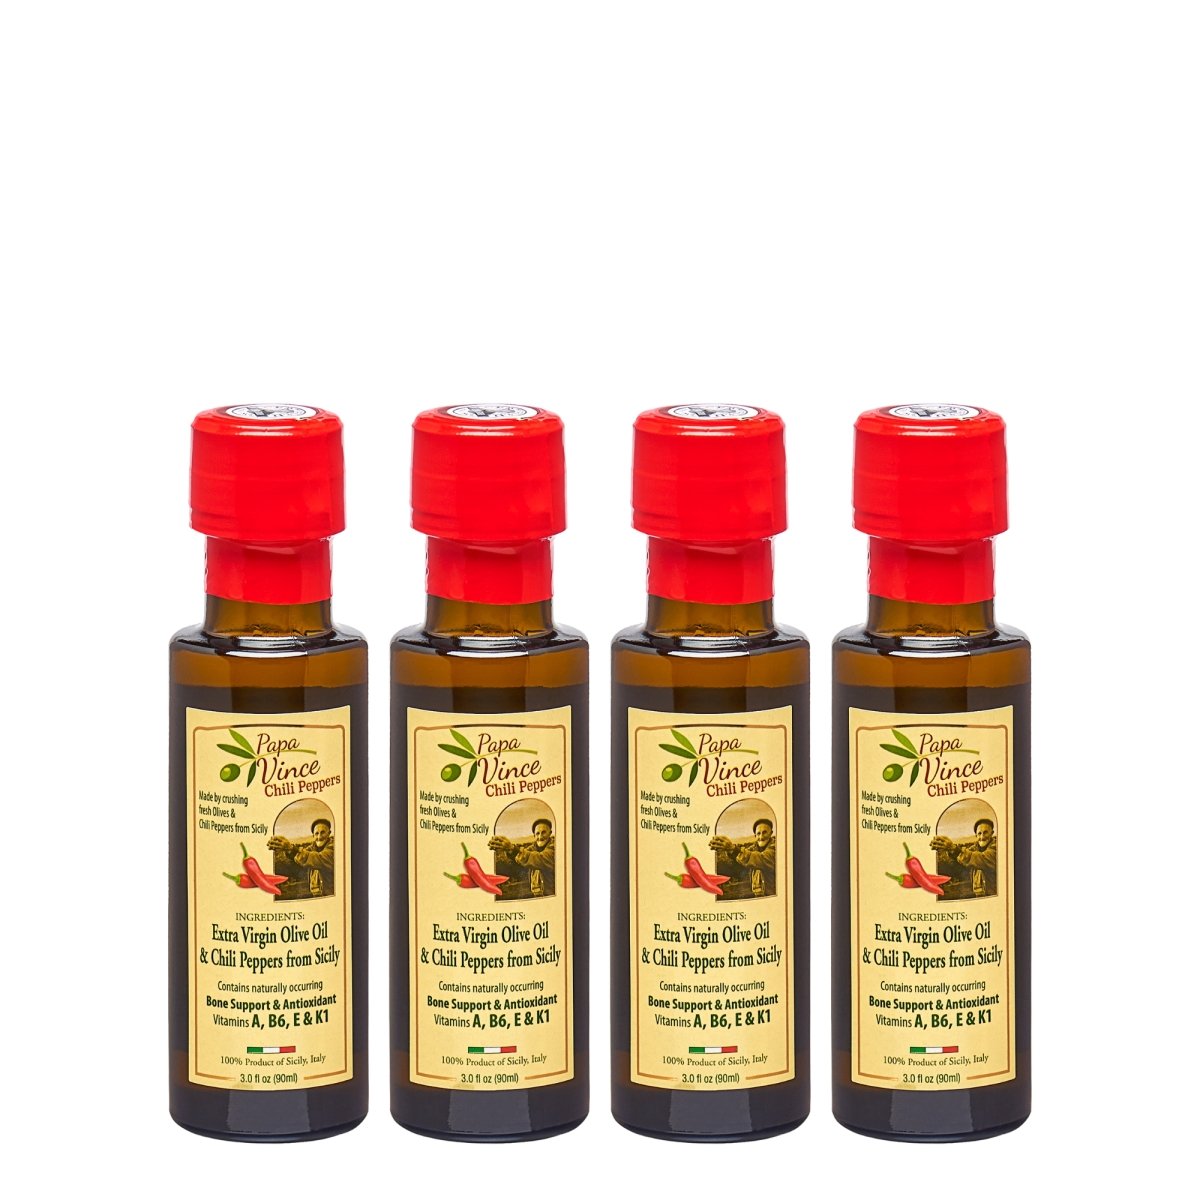 Chili Olive Oil from Sicily - Extra Virgin Olive Oil Agrumato, Unblended, First Cold Pressed, Single Sourced from Italy, Unfiltered, Unrefined, Robust, Rich in Antioxidants 3 fl oz [4Pack] | Papa Vince - Papa Vince